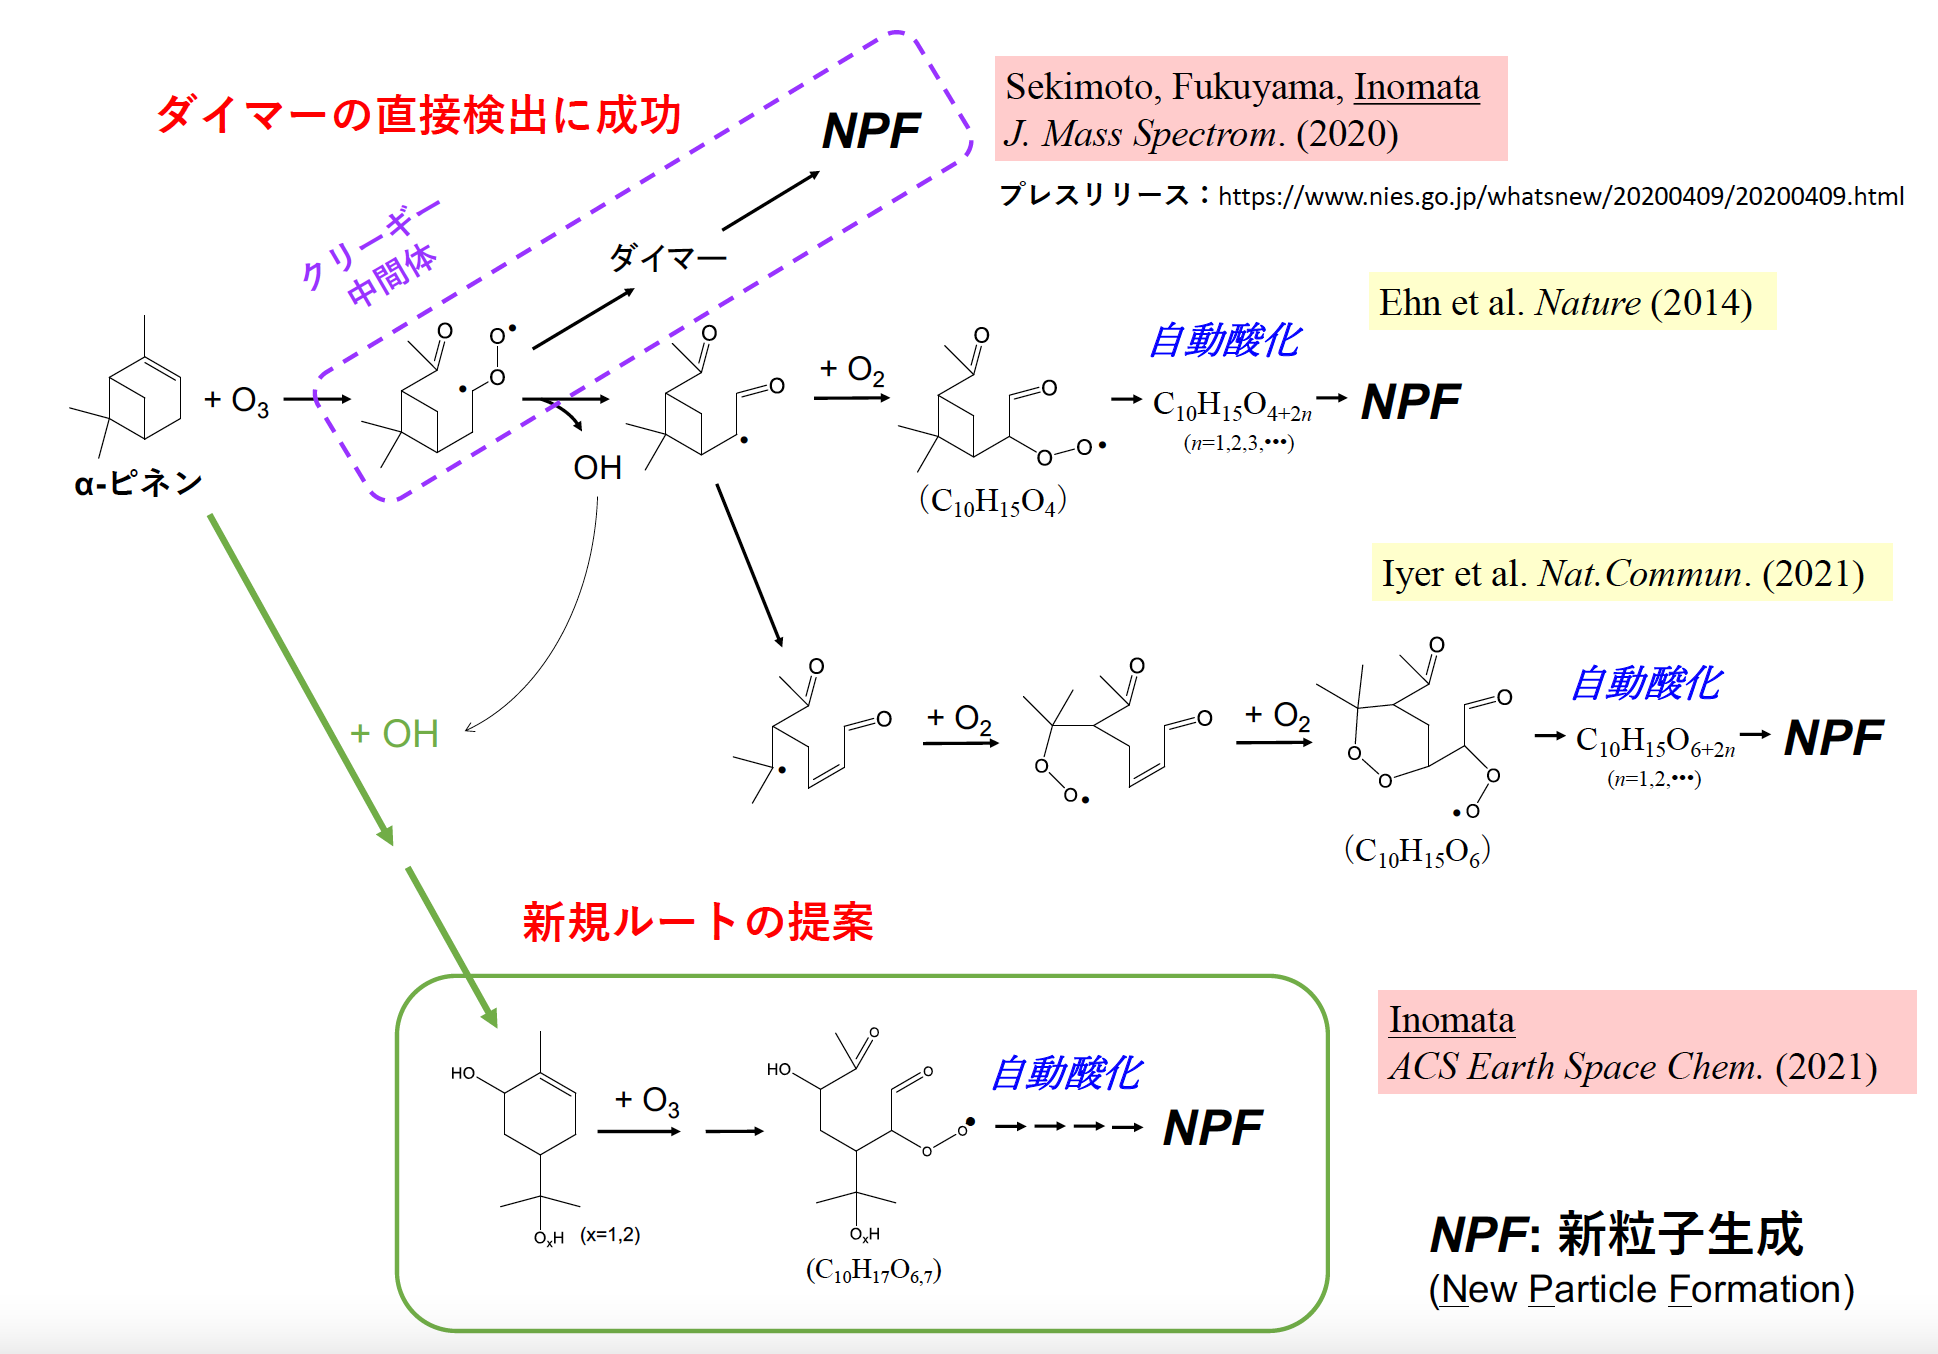 A new reaction pathway for new particle formation during α-pinene ozonolysis